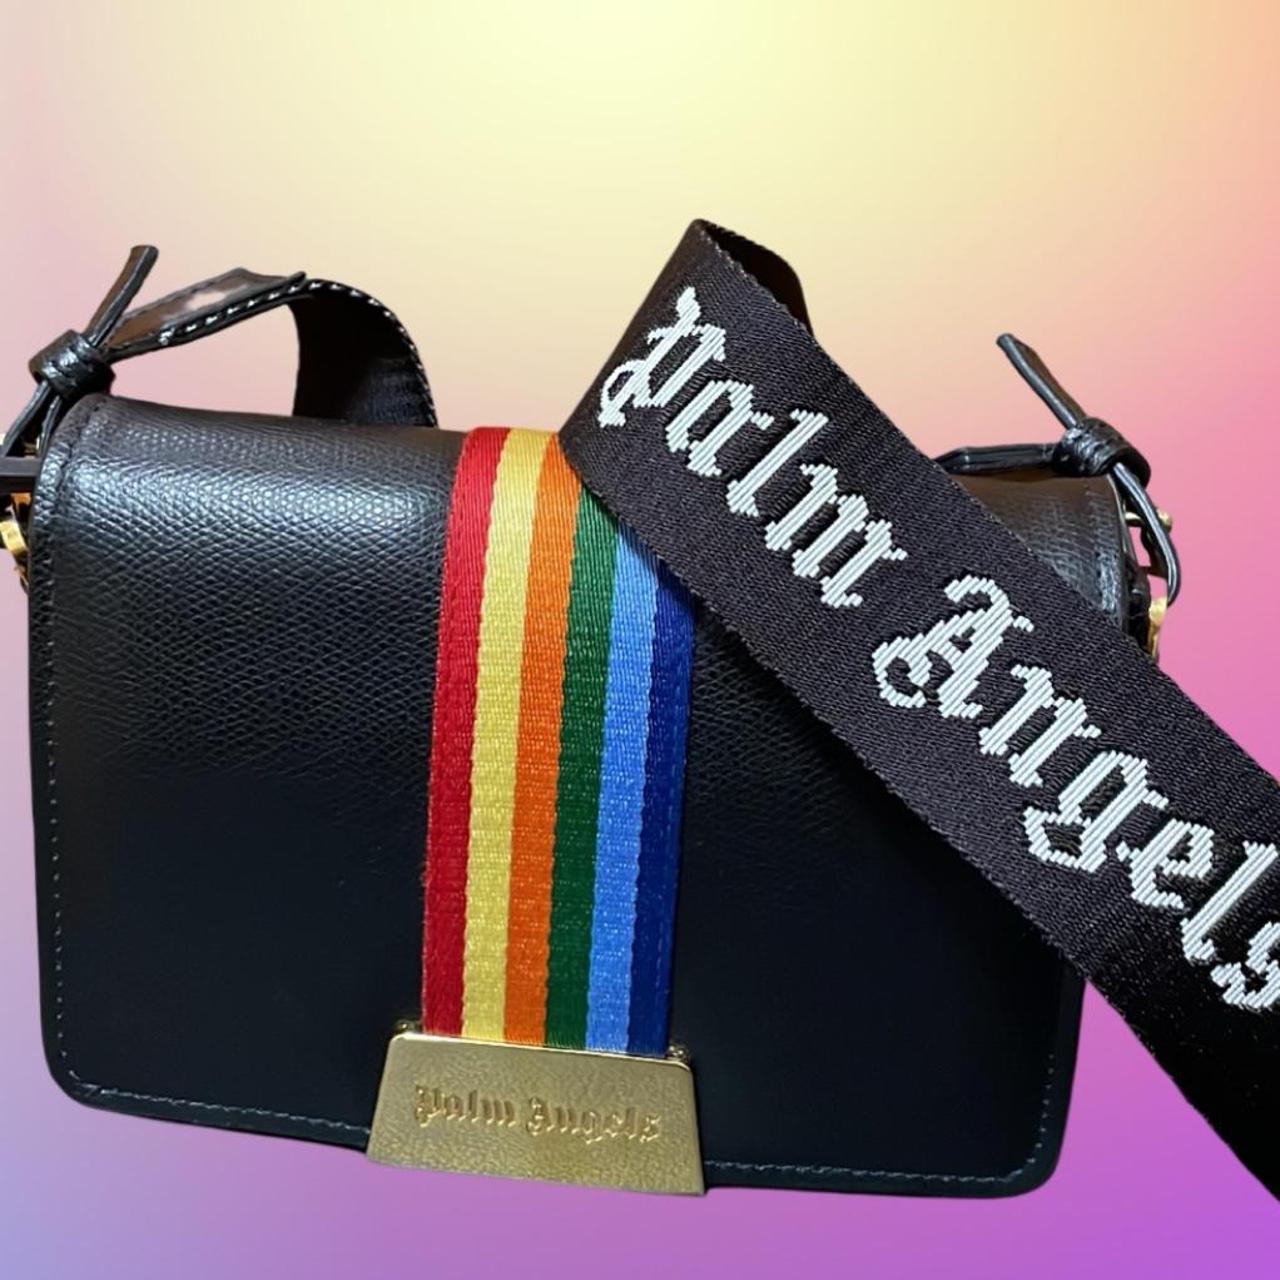 Product Image 1 - Rare Palm Angels Crossbody Bag

In